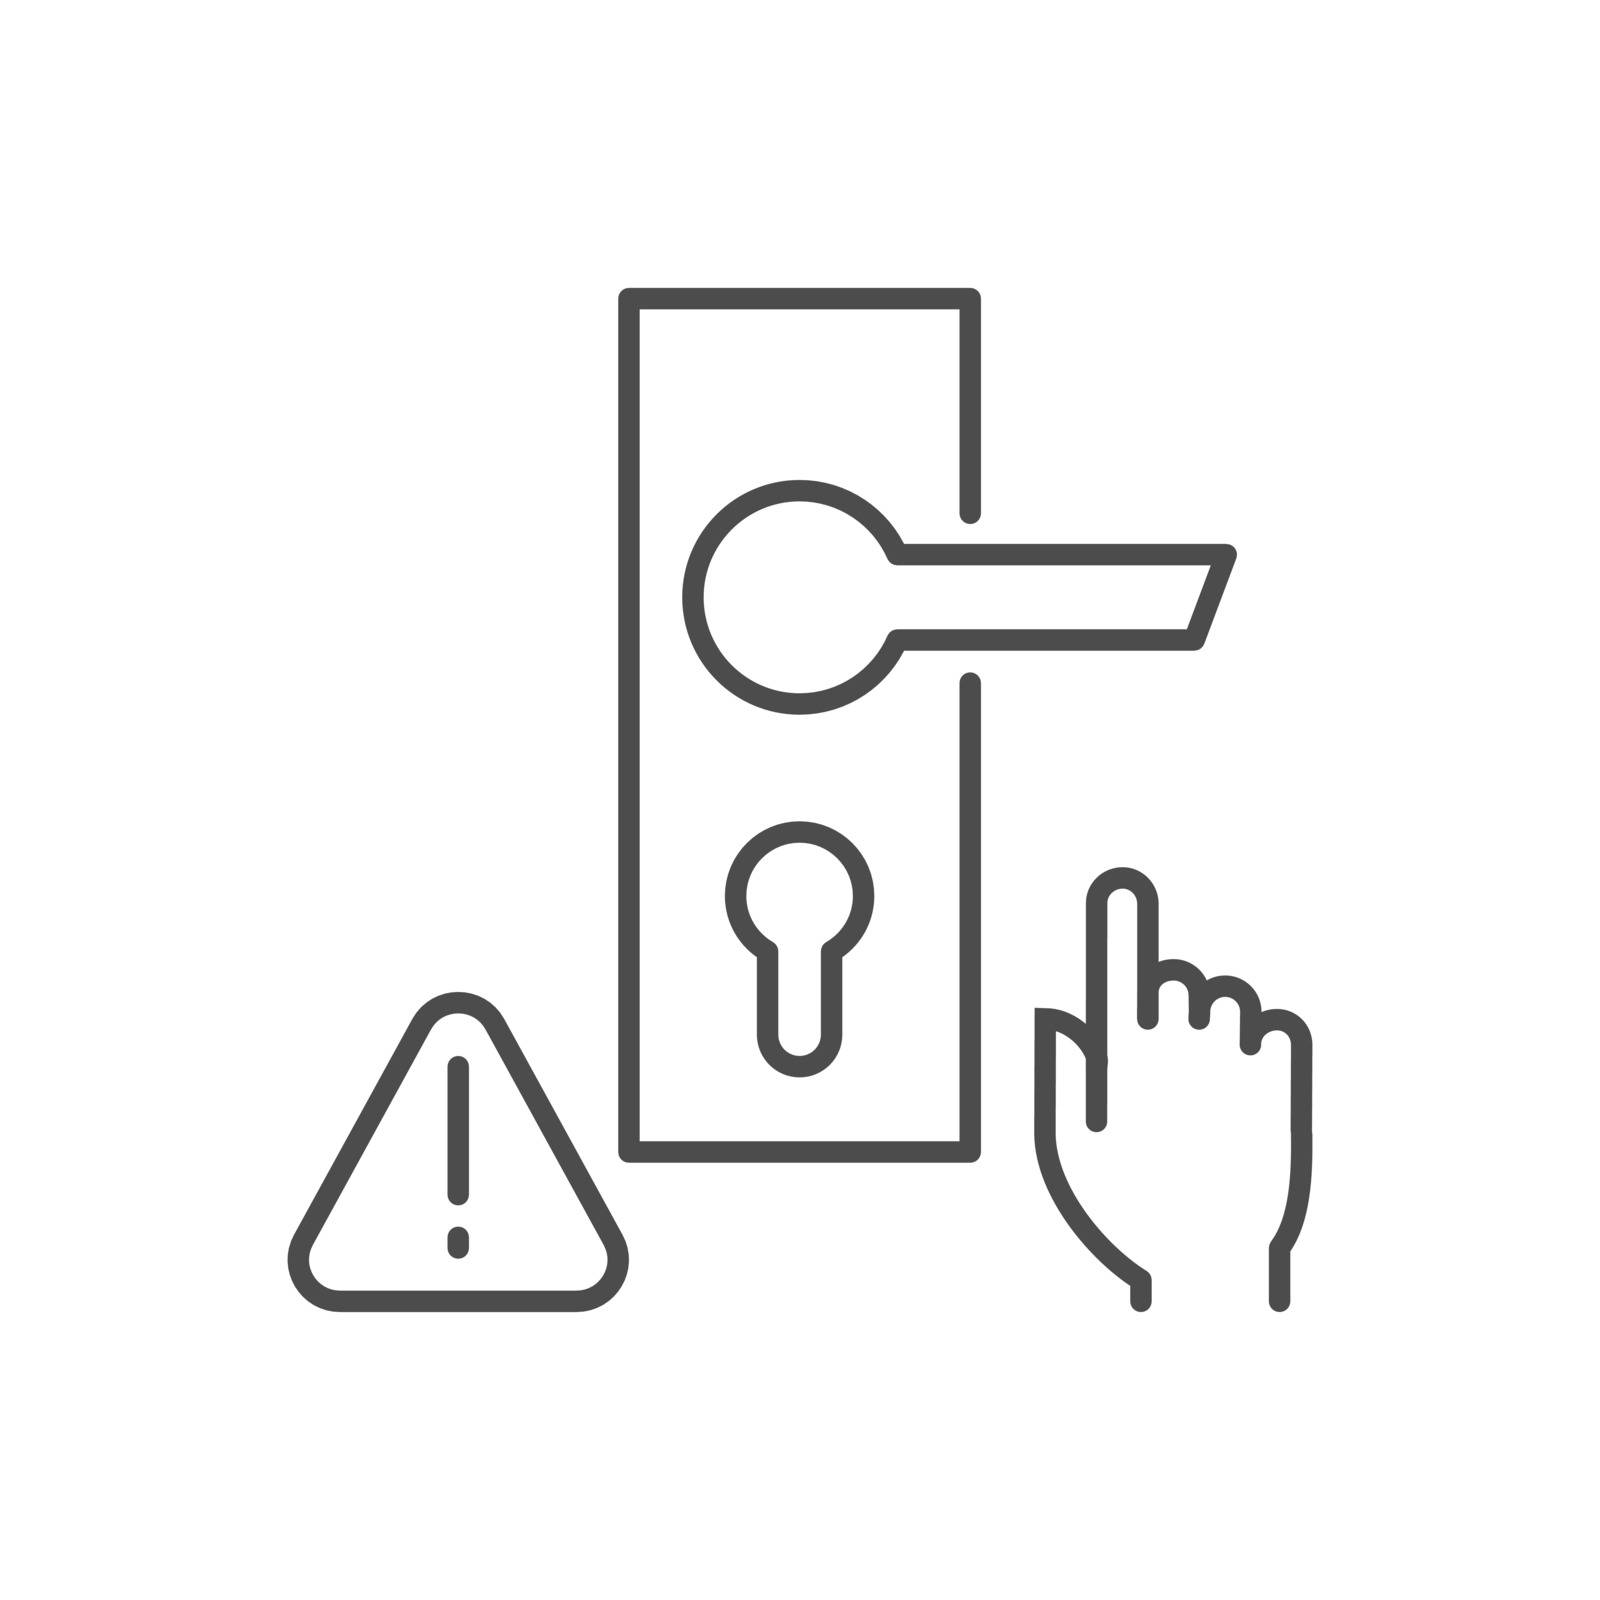 Don't touch door handle related vector thin line icon. by smoki